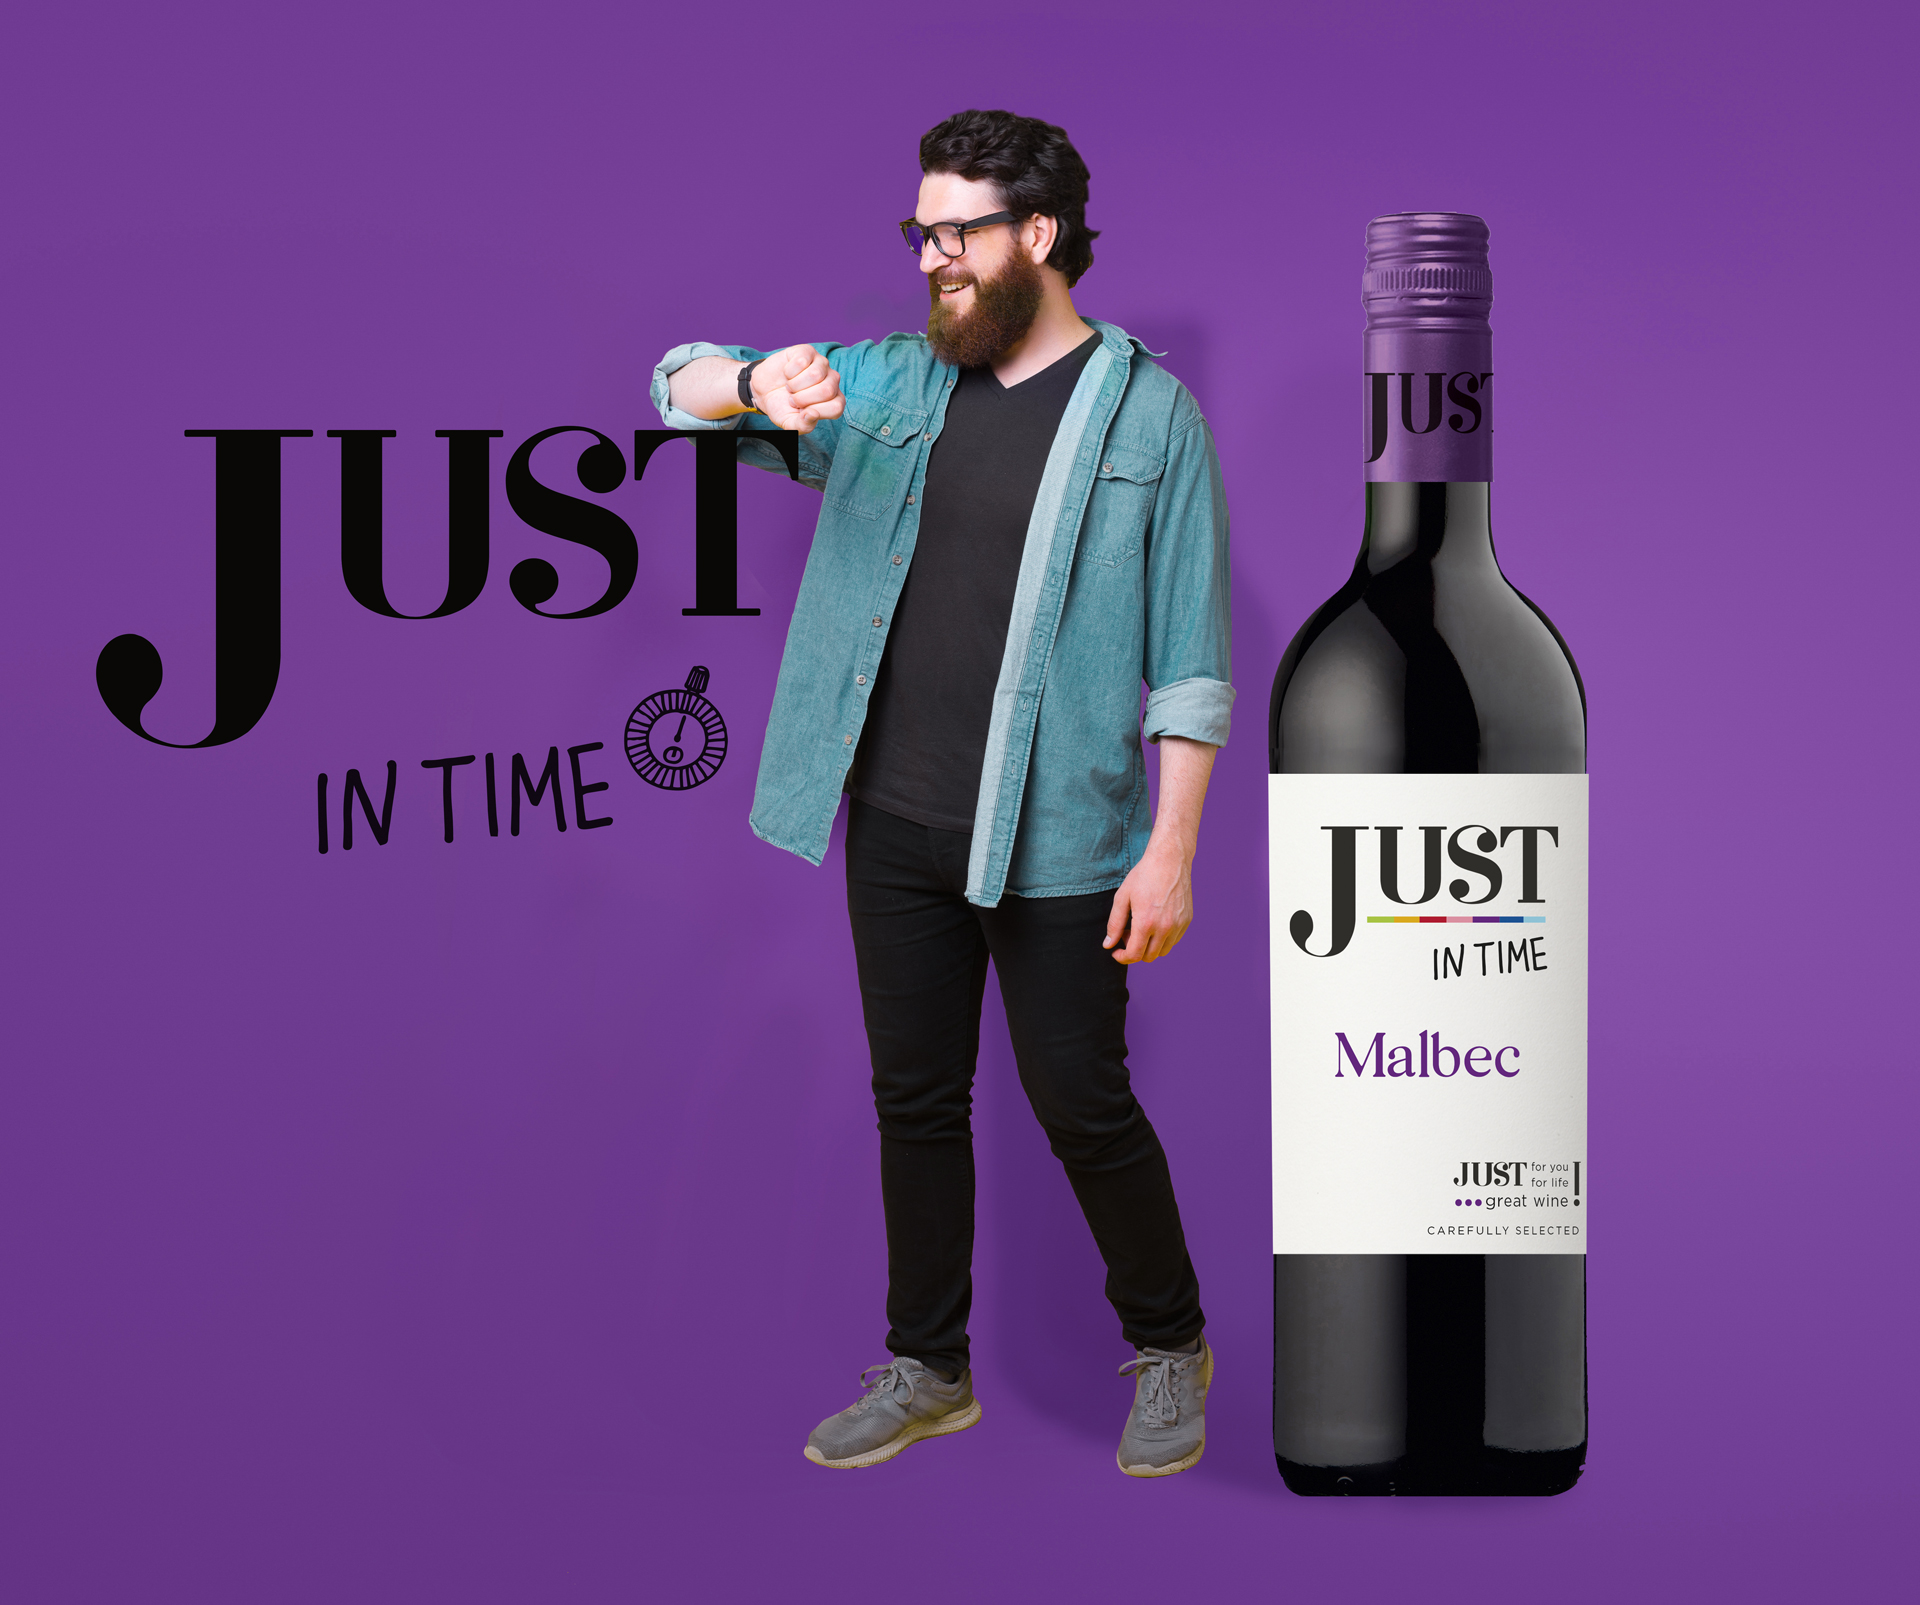 JUST "In Time" Malbec